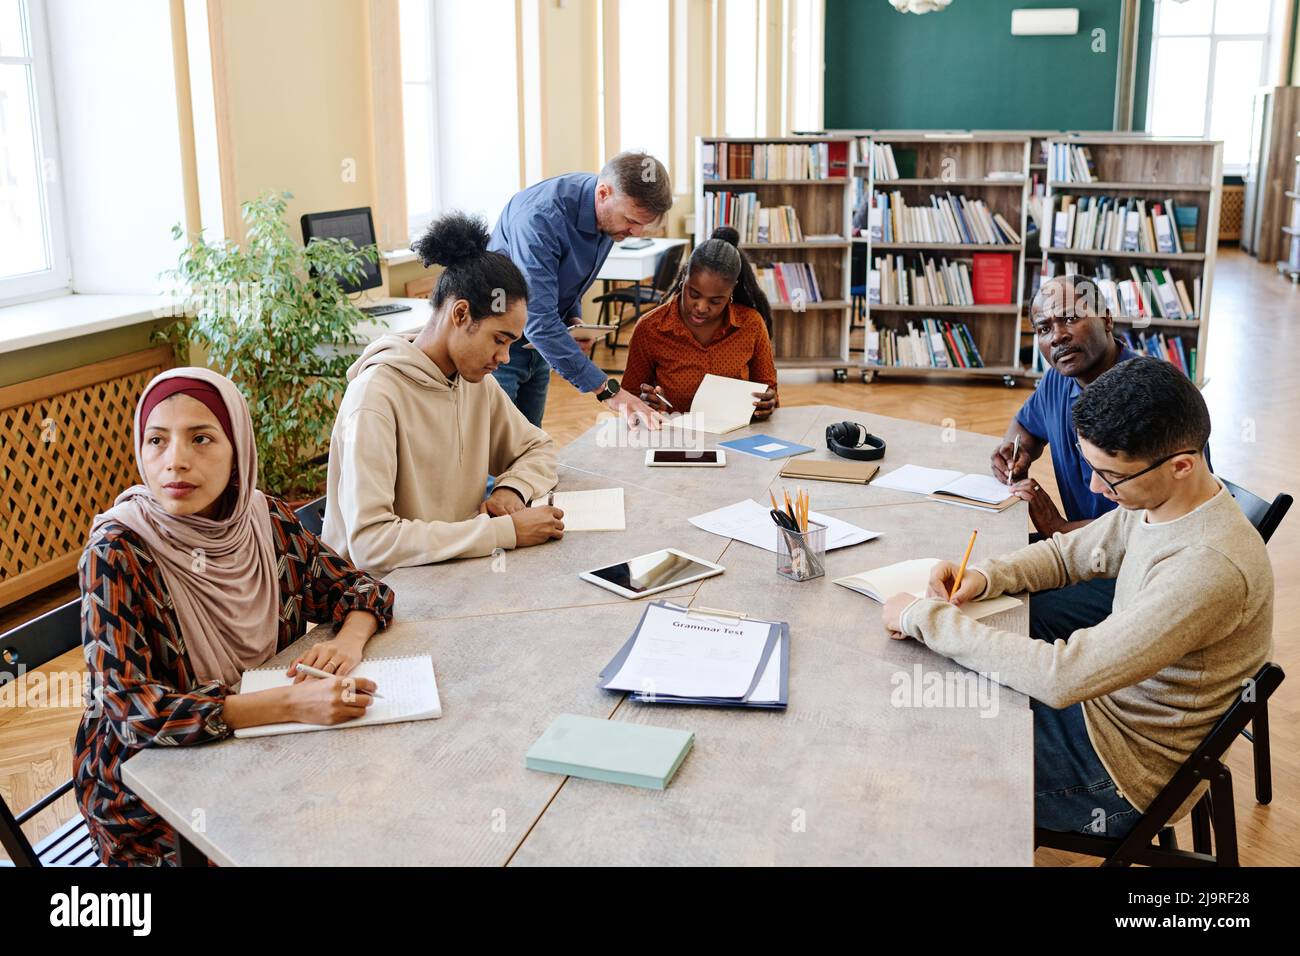 High angle view shot of mature teacher working with multi-ethnic group of immigrant students in library Stock Photo